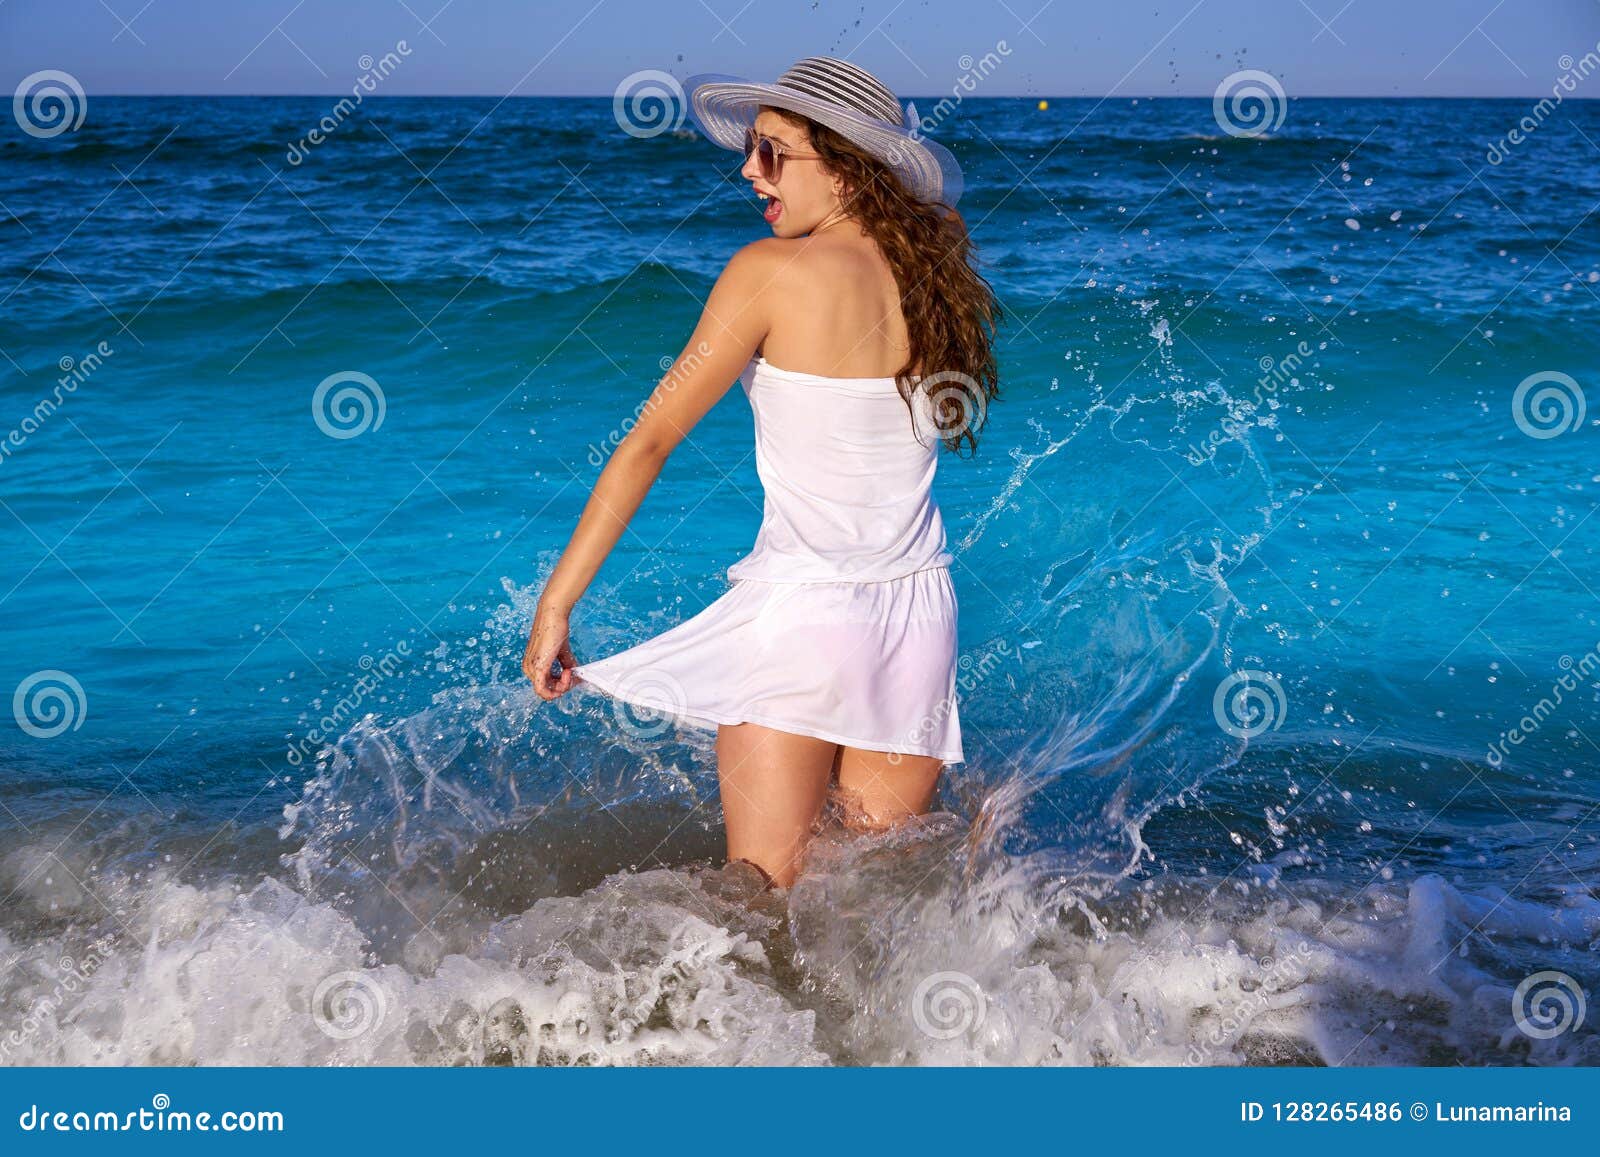 Preteen Girl Carrying A Surfboard To The Ocean Stock Image 